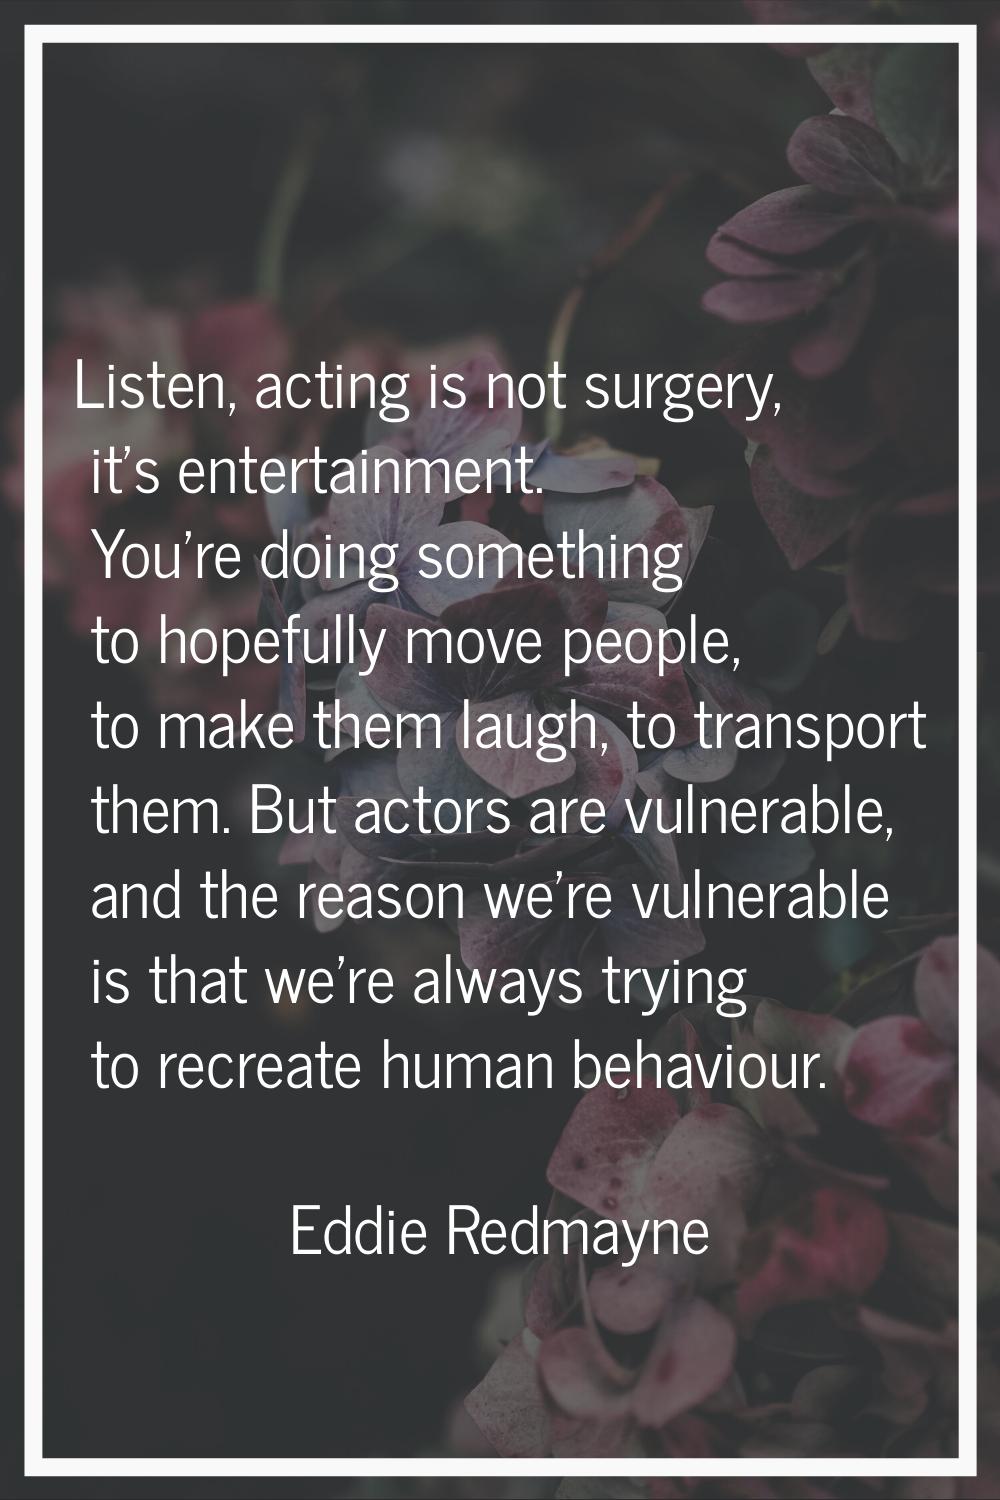 Listen, acting is not surgery, it's entertainment. You're doing something to hopefully move people,